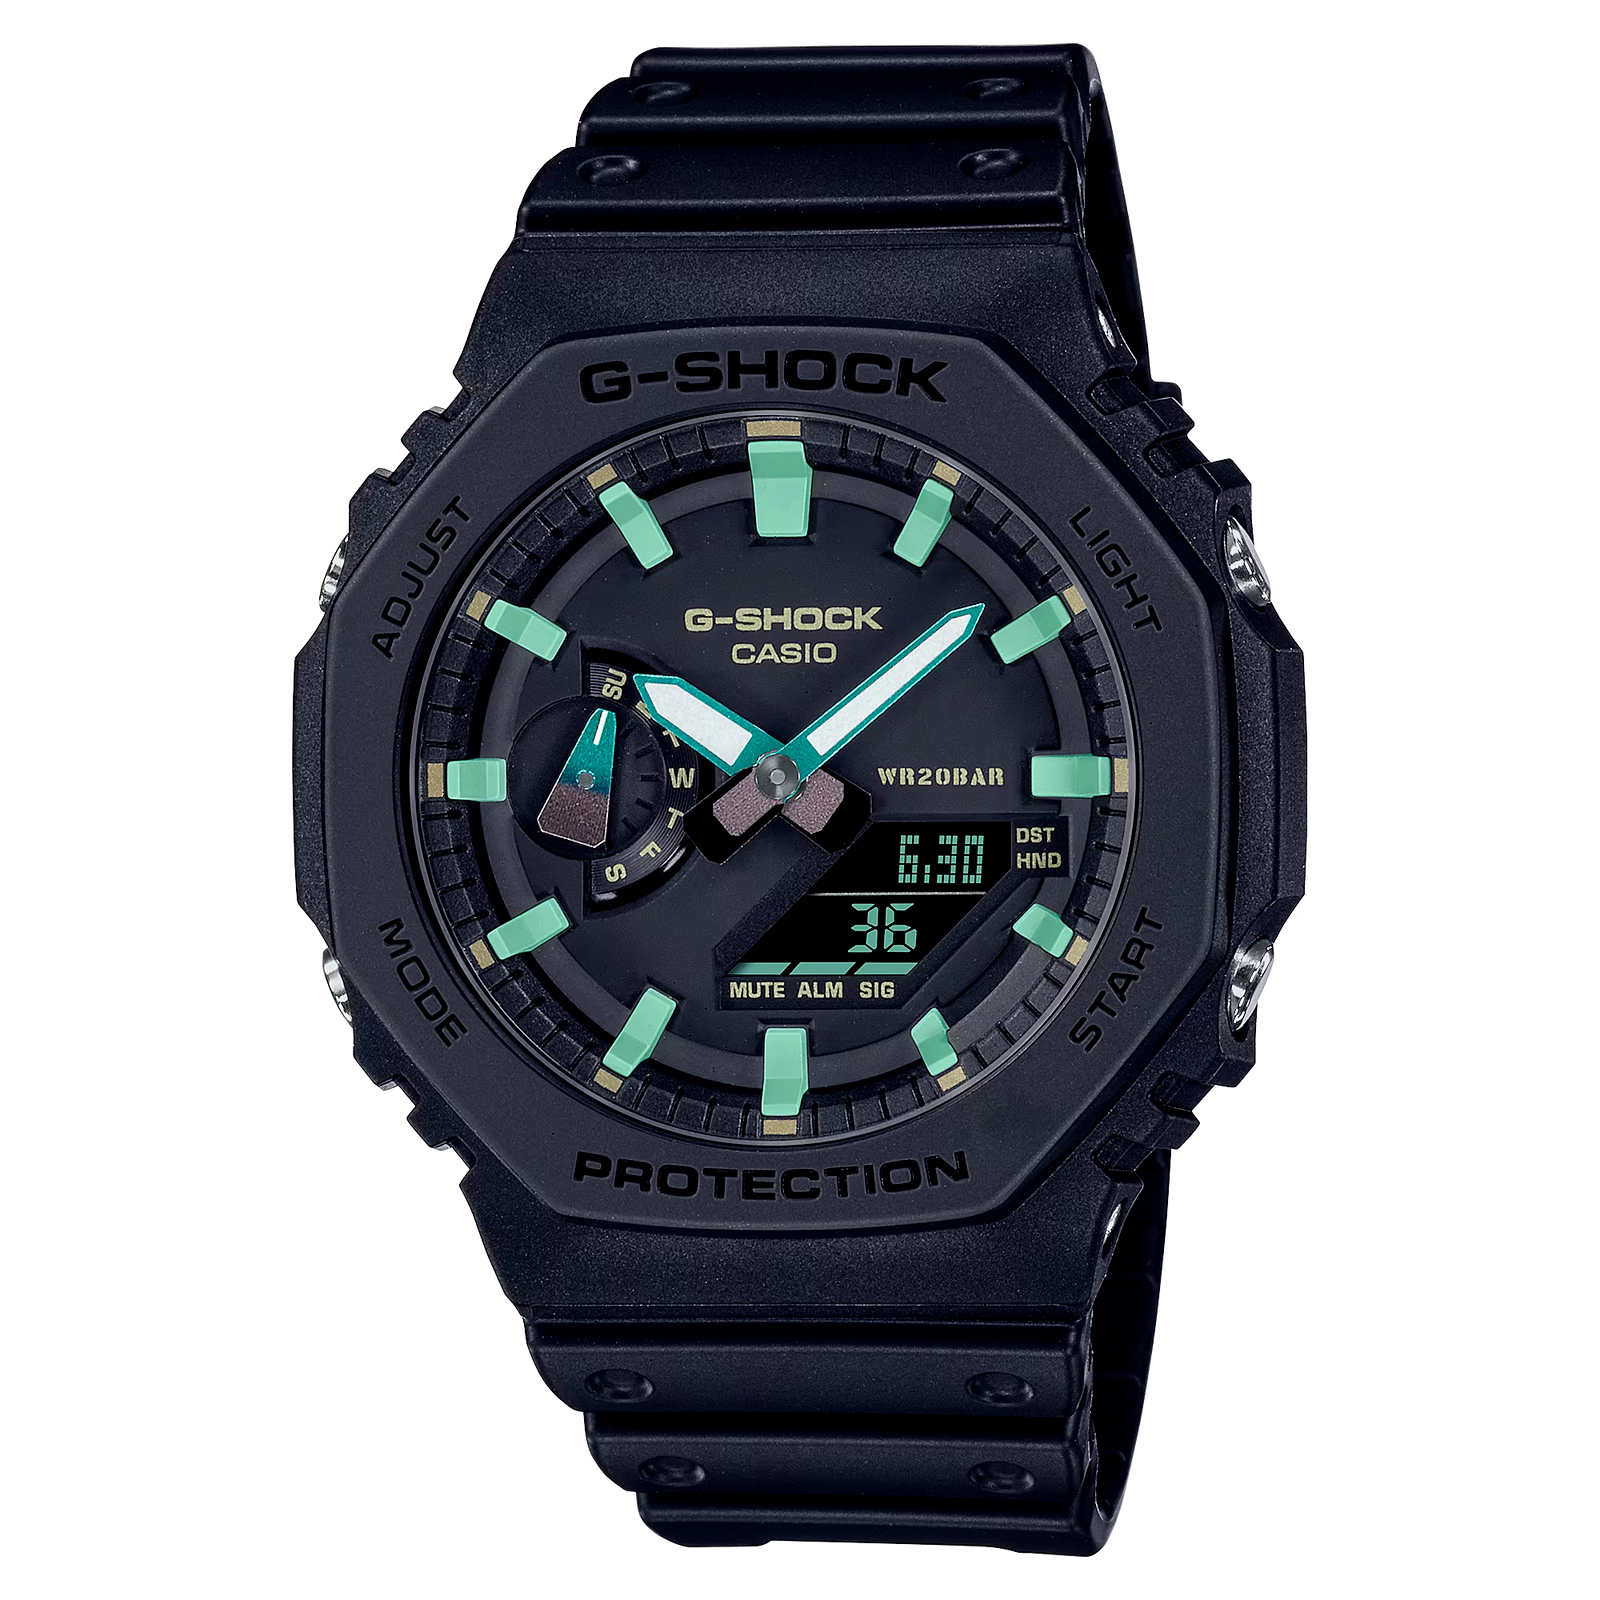 New Casio G-Shock Carbon Core Guard Rusted Iron World Time Watch GA-2100RC- 1A | WatchCharts Marketplace